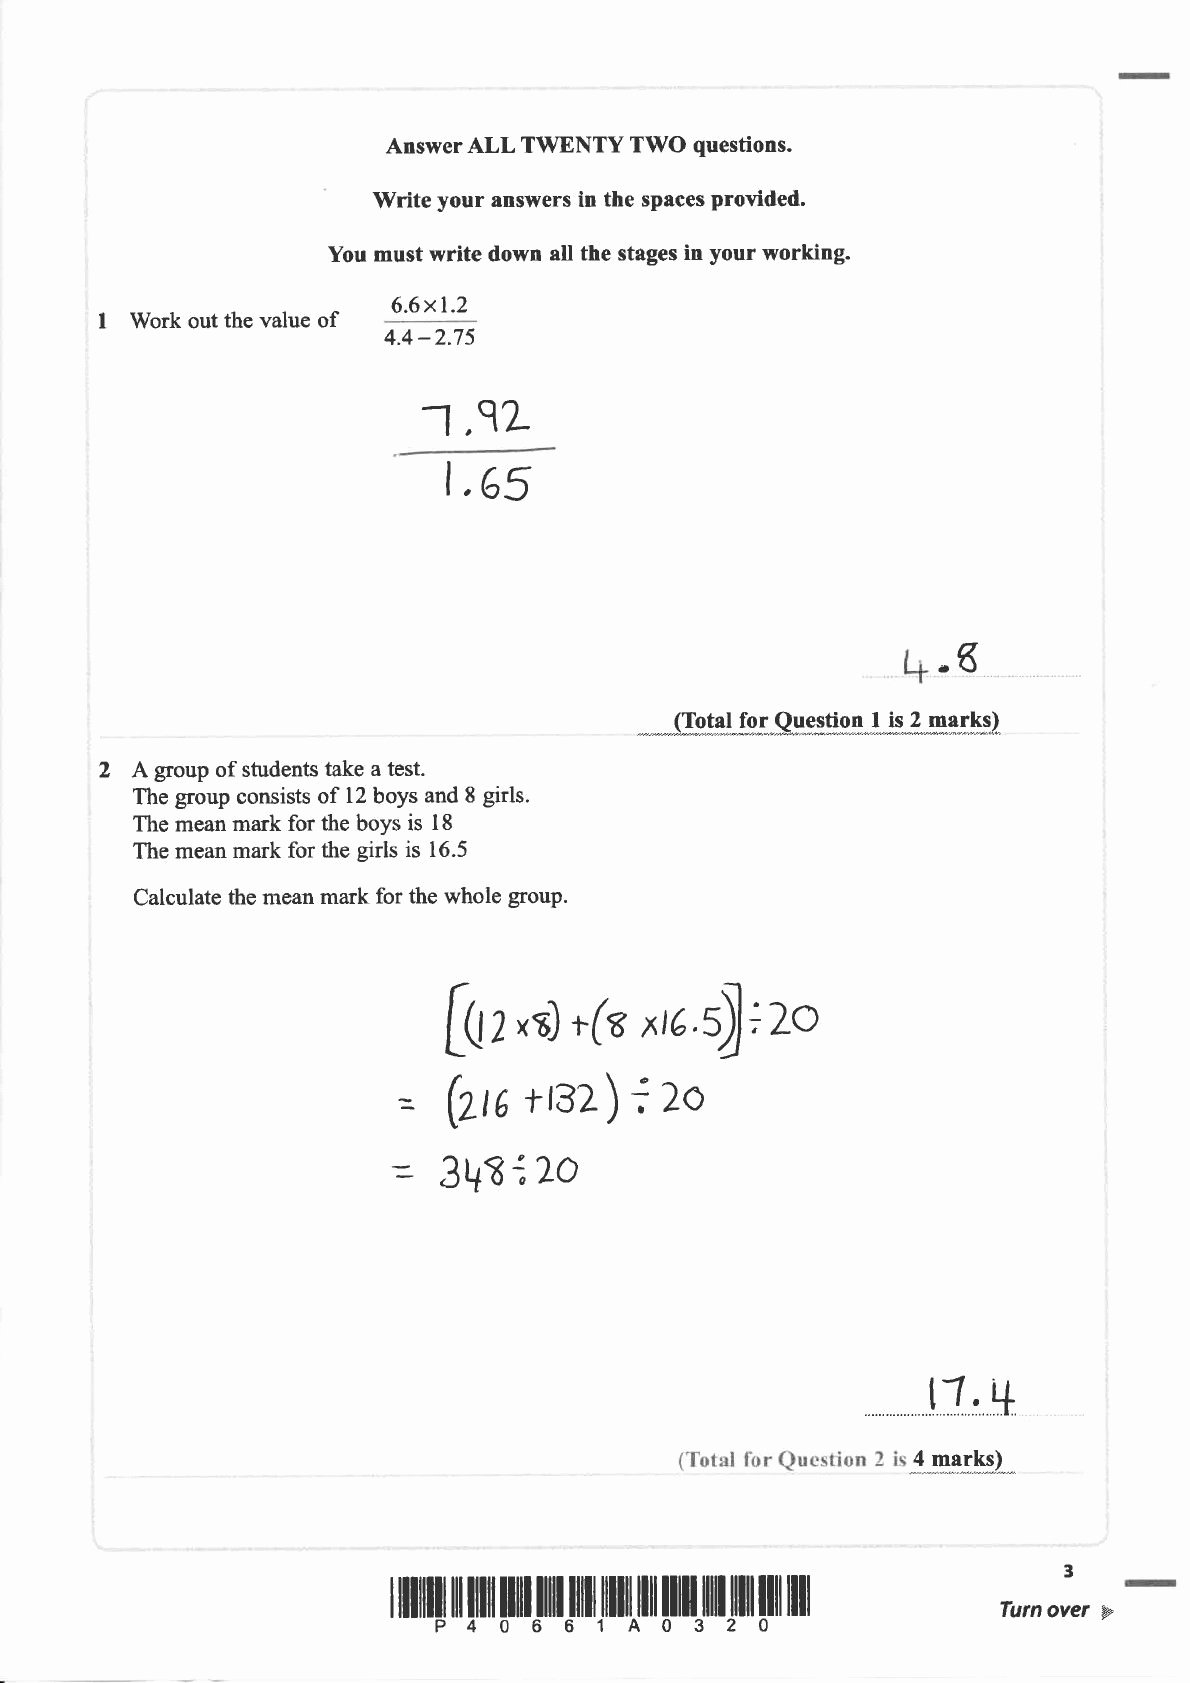 Domain and Range Worksheet Answers Unique Domain and Range Worksheet 2 Answers